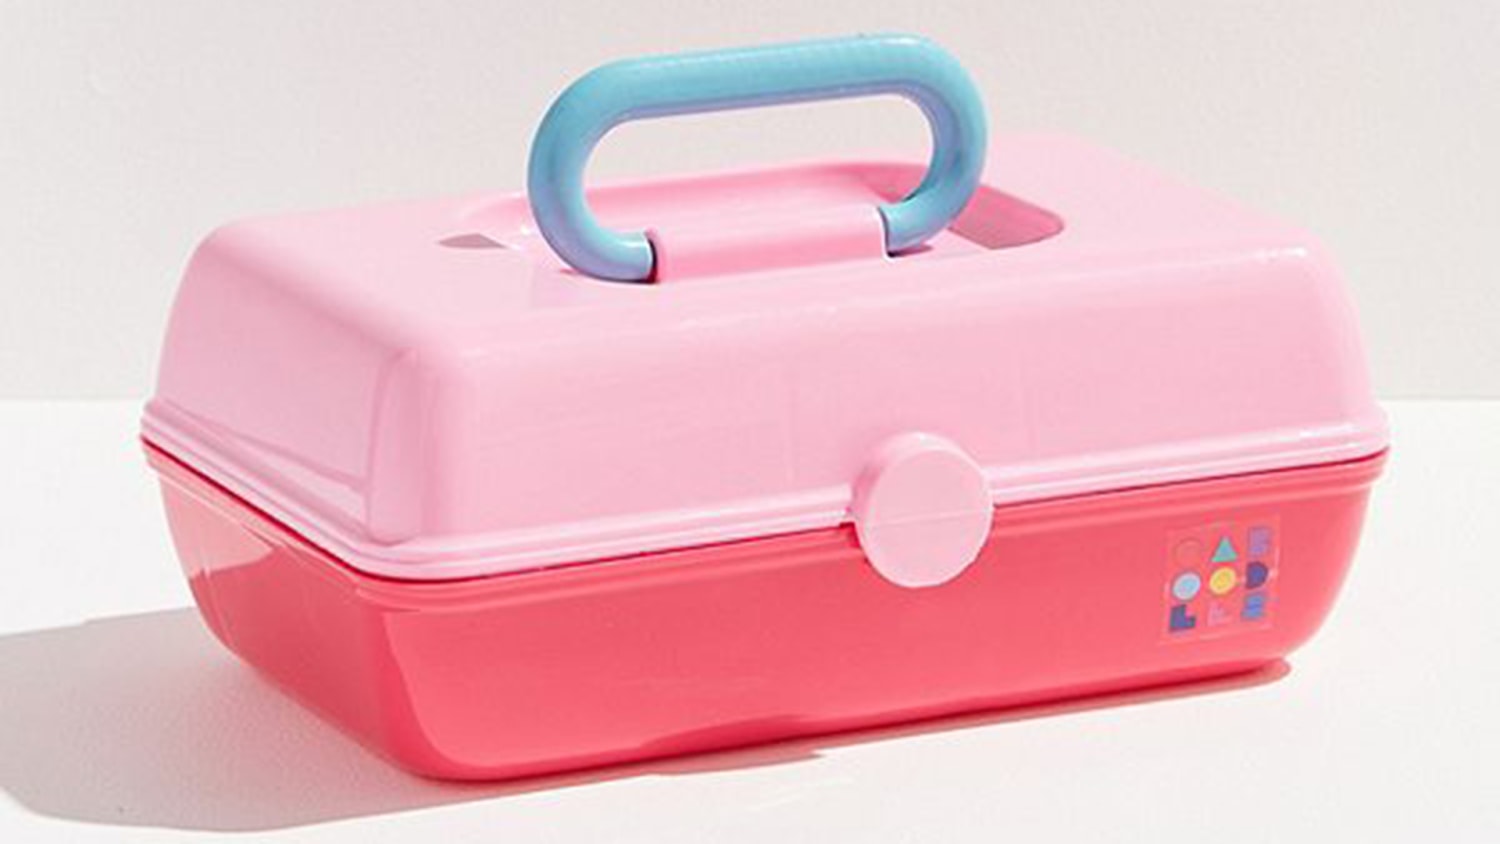 Urban Outfitters is selling Caboodles now, just like the '90s!